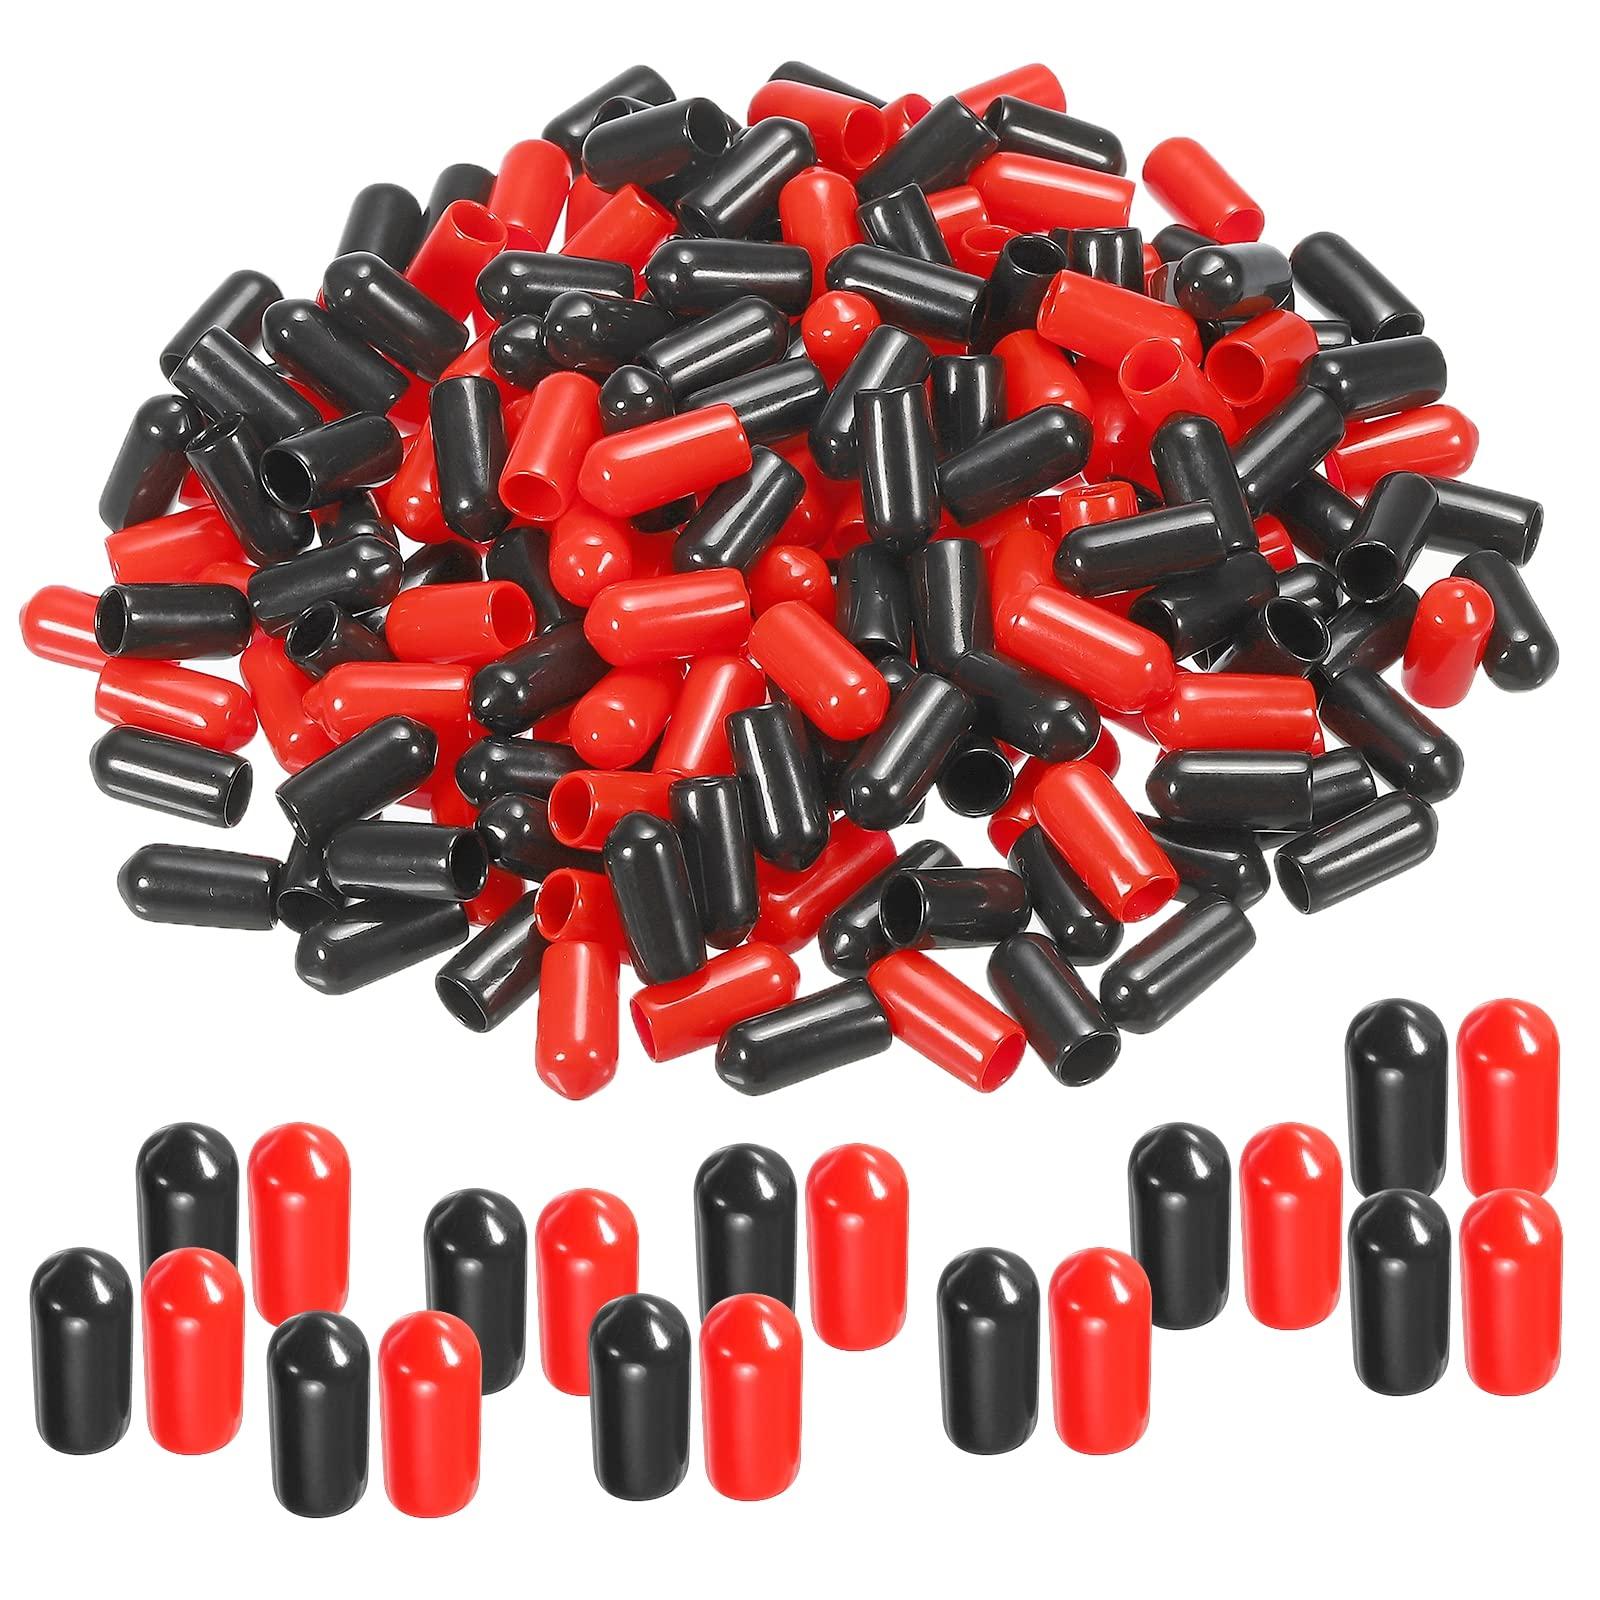 sourcing map 200pcs Rubber End Caps Cover Assortment 6mm PVC Vinyl Screw Thread Protector for Screw Bolt Black Red